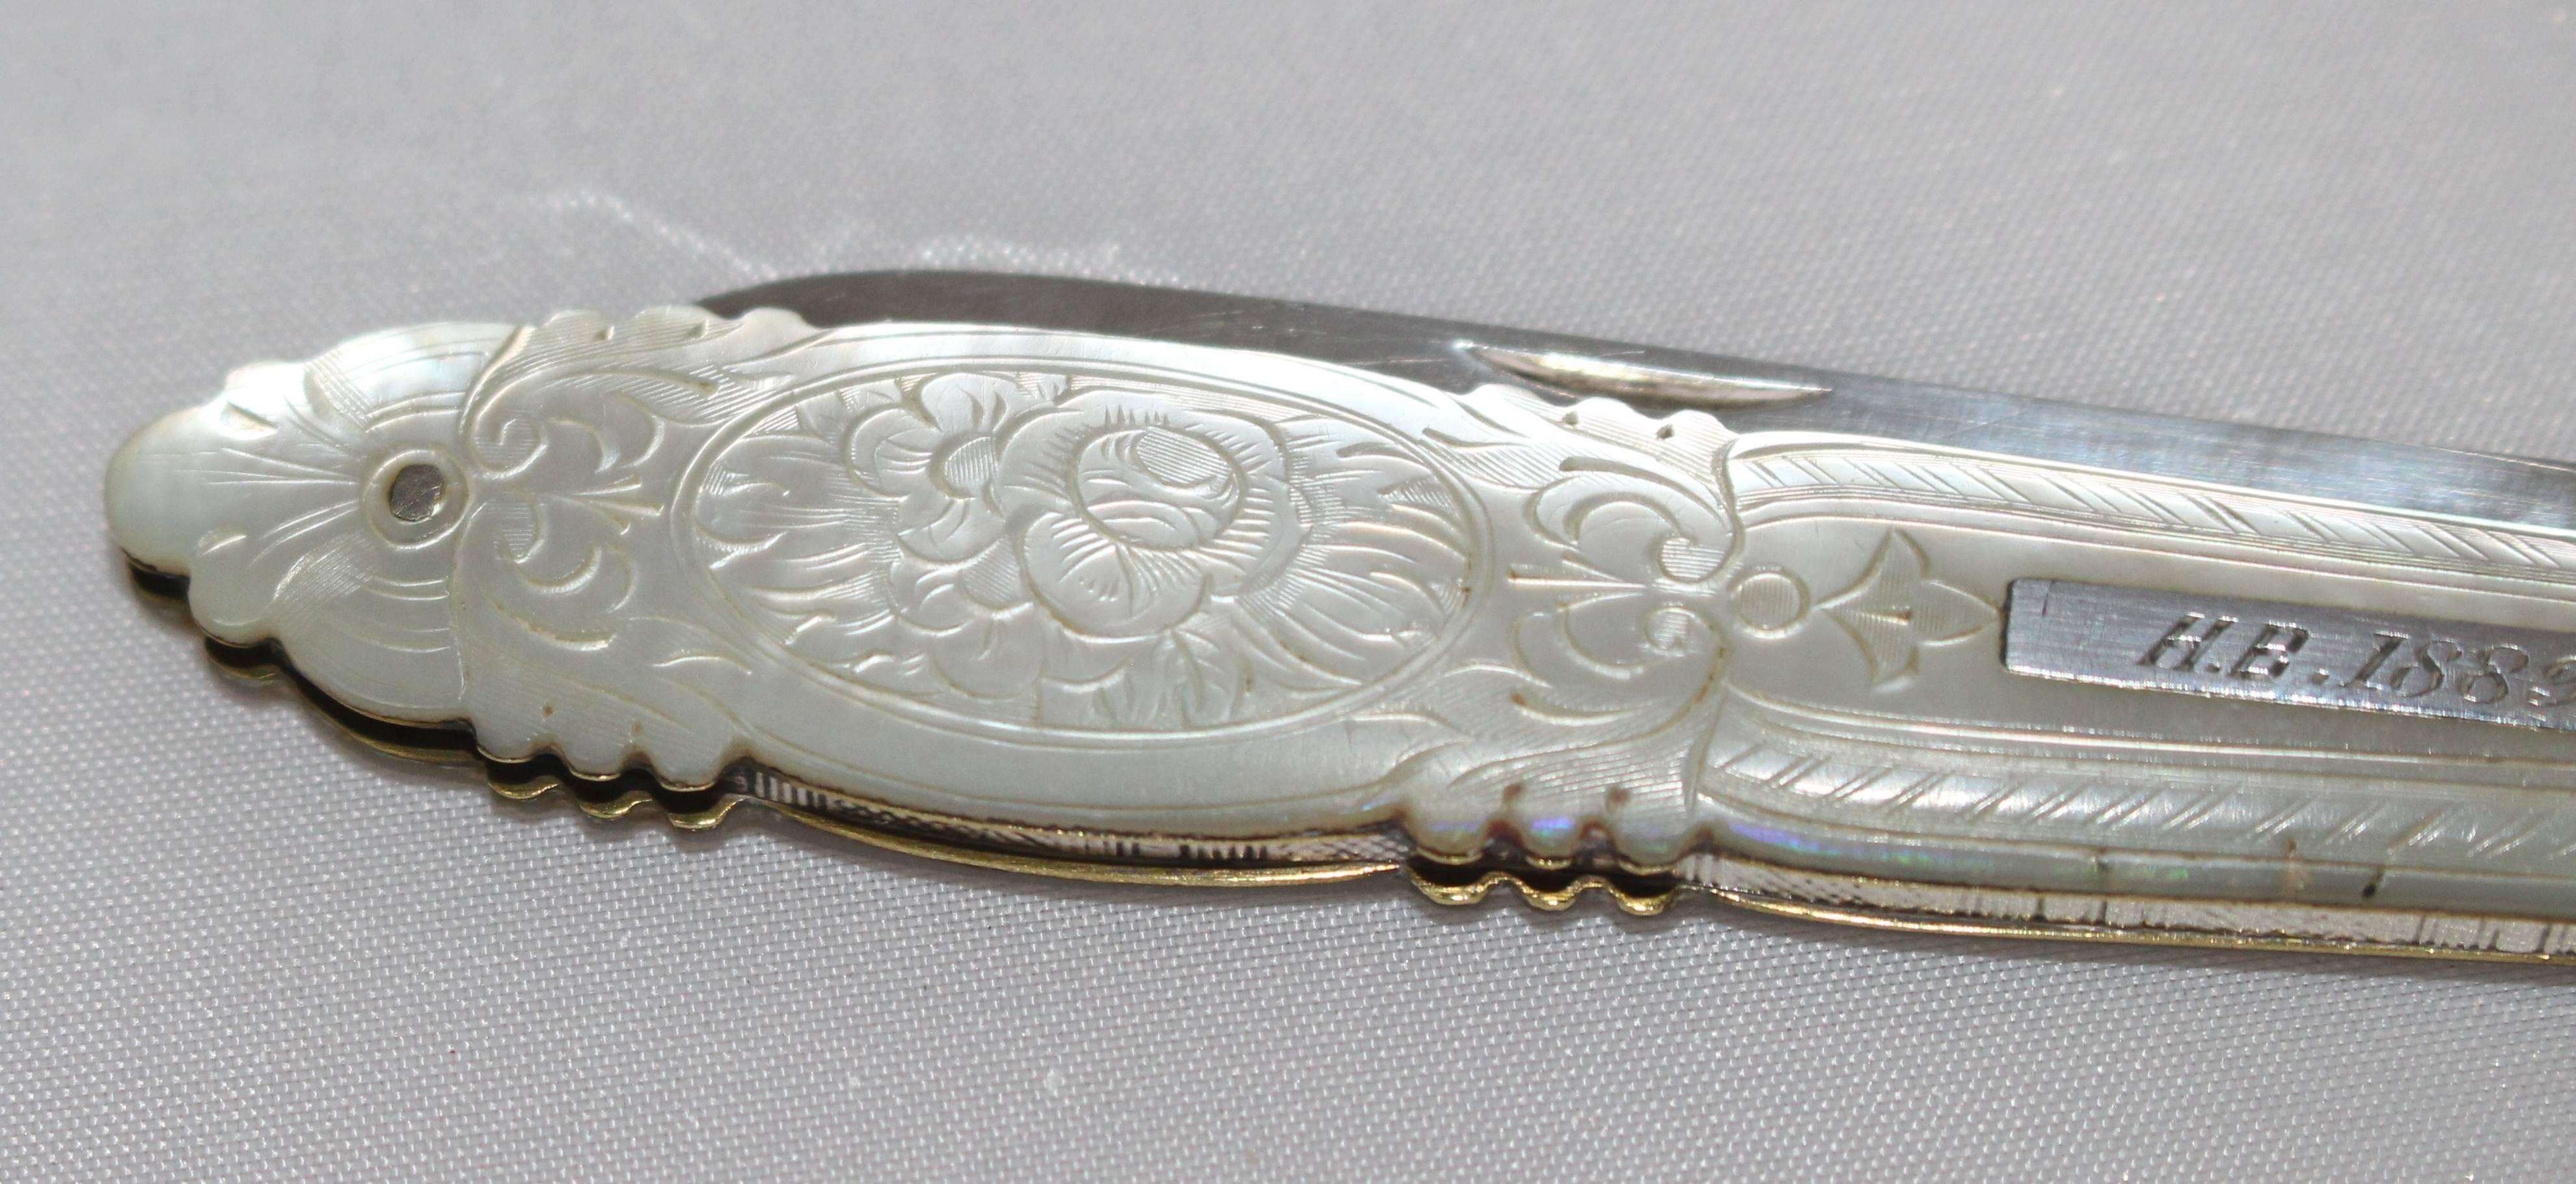 Lovely quality Victorian fruit knife

Silver blade with mother of pearl handle. Silver plaque to handle reads 'H.B.1889.'
 

Period: 
Late Victorian

Hallmark: 
Sterling silver, Birmingham, Thomas Marples, 1885

Condition: 
Good